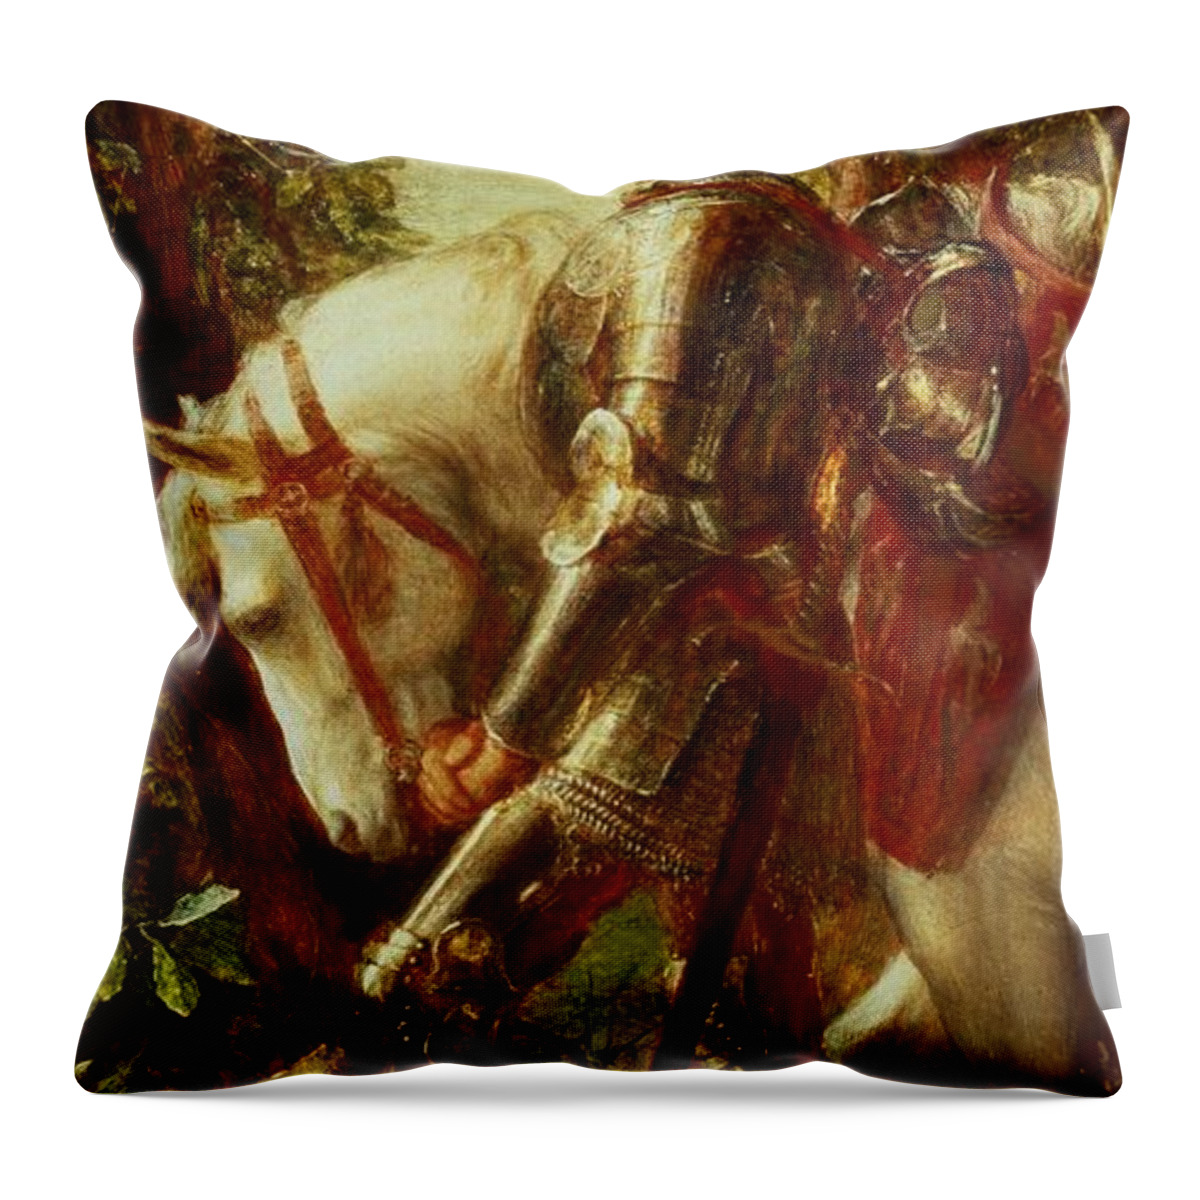 Arthur Throw Pillow featuring the painting Sir Galahad by George Frederic Watts